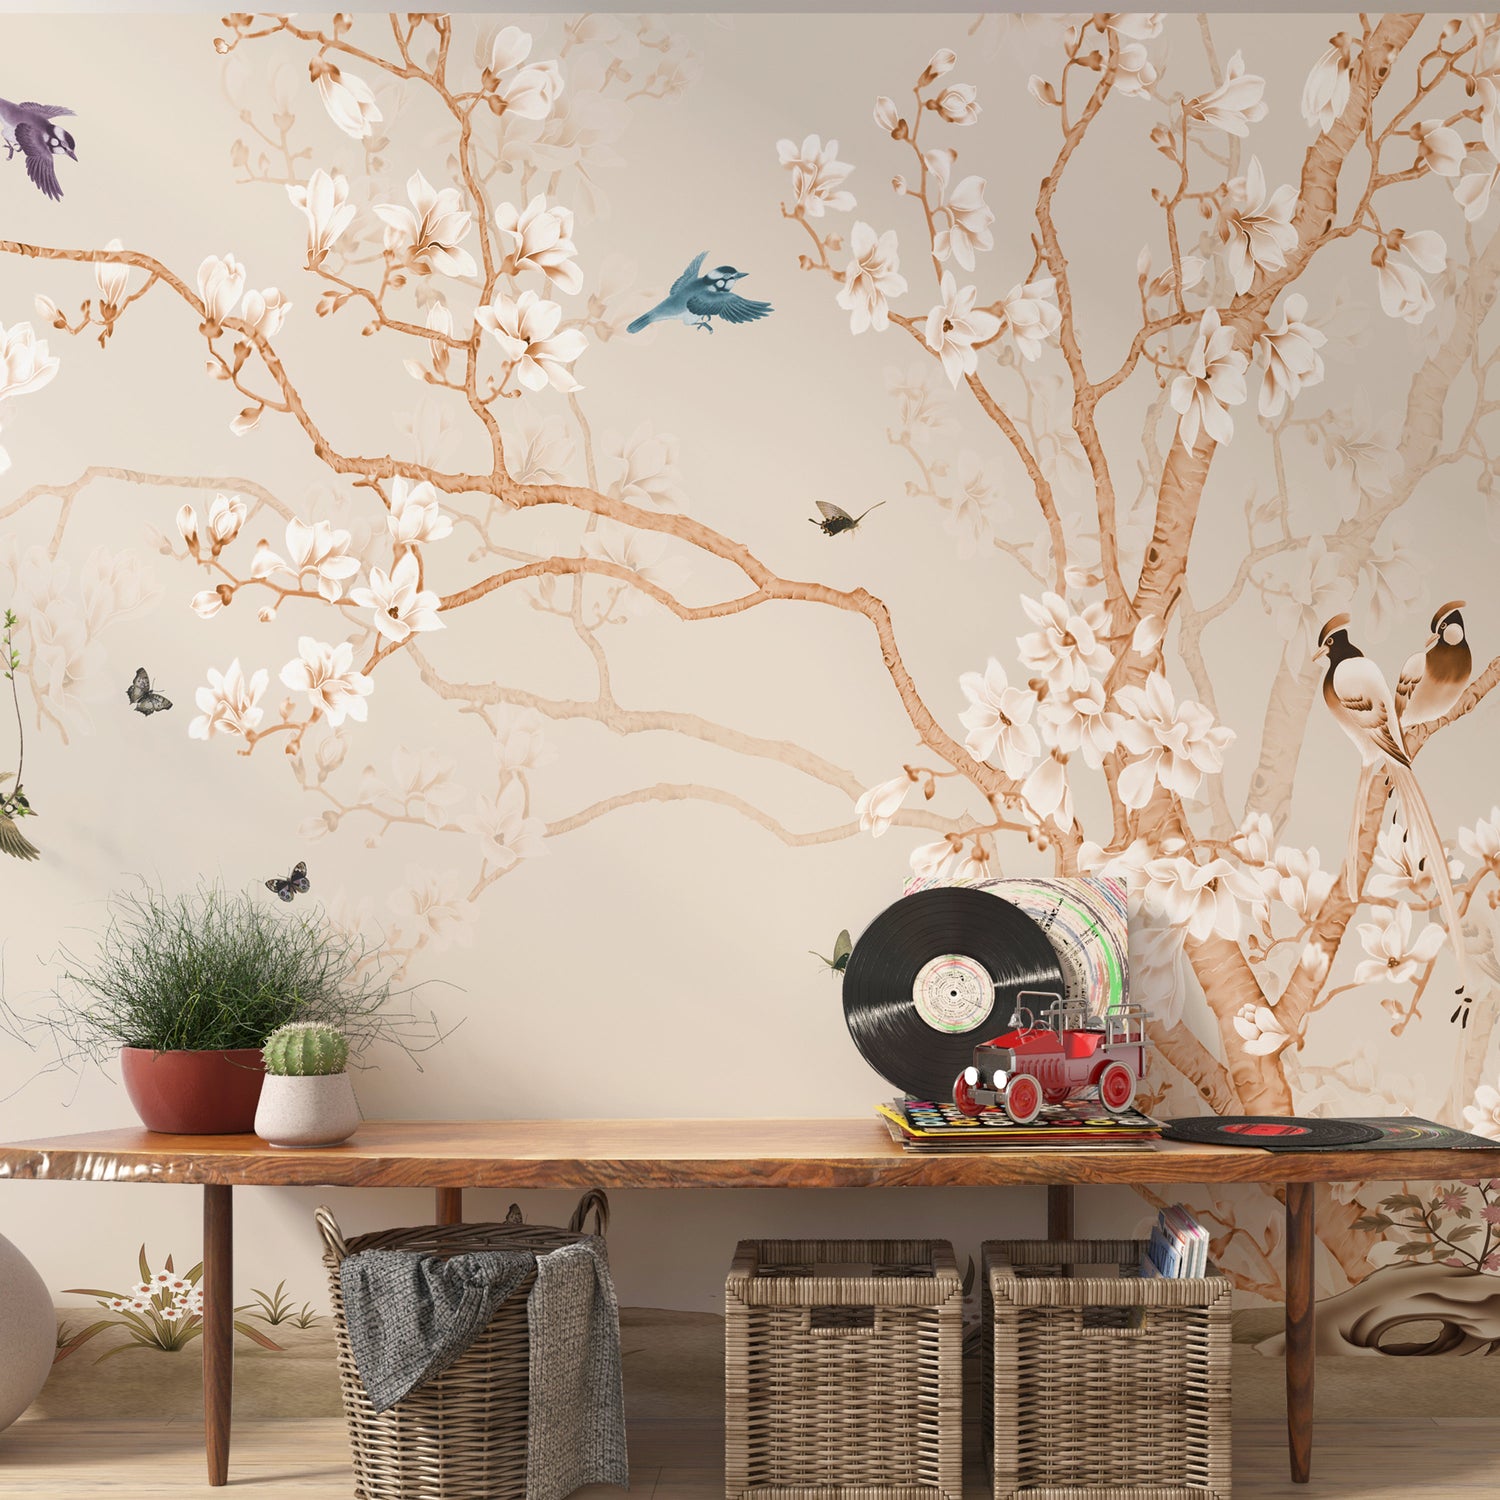 Chinoiserie Vintage Wallpaper, Wallpaper With Birds and Flowers, Asian Wallpaper, Tree Wall Mural, Removable Wallpaper,